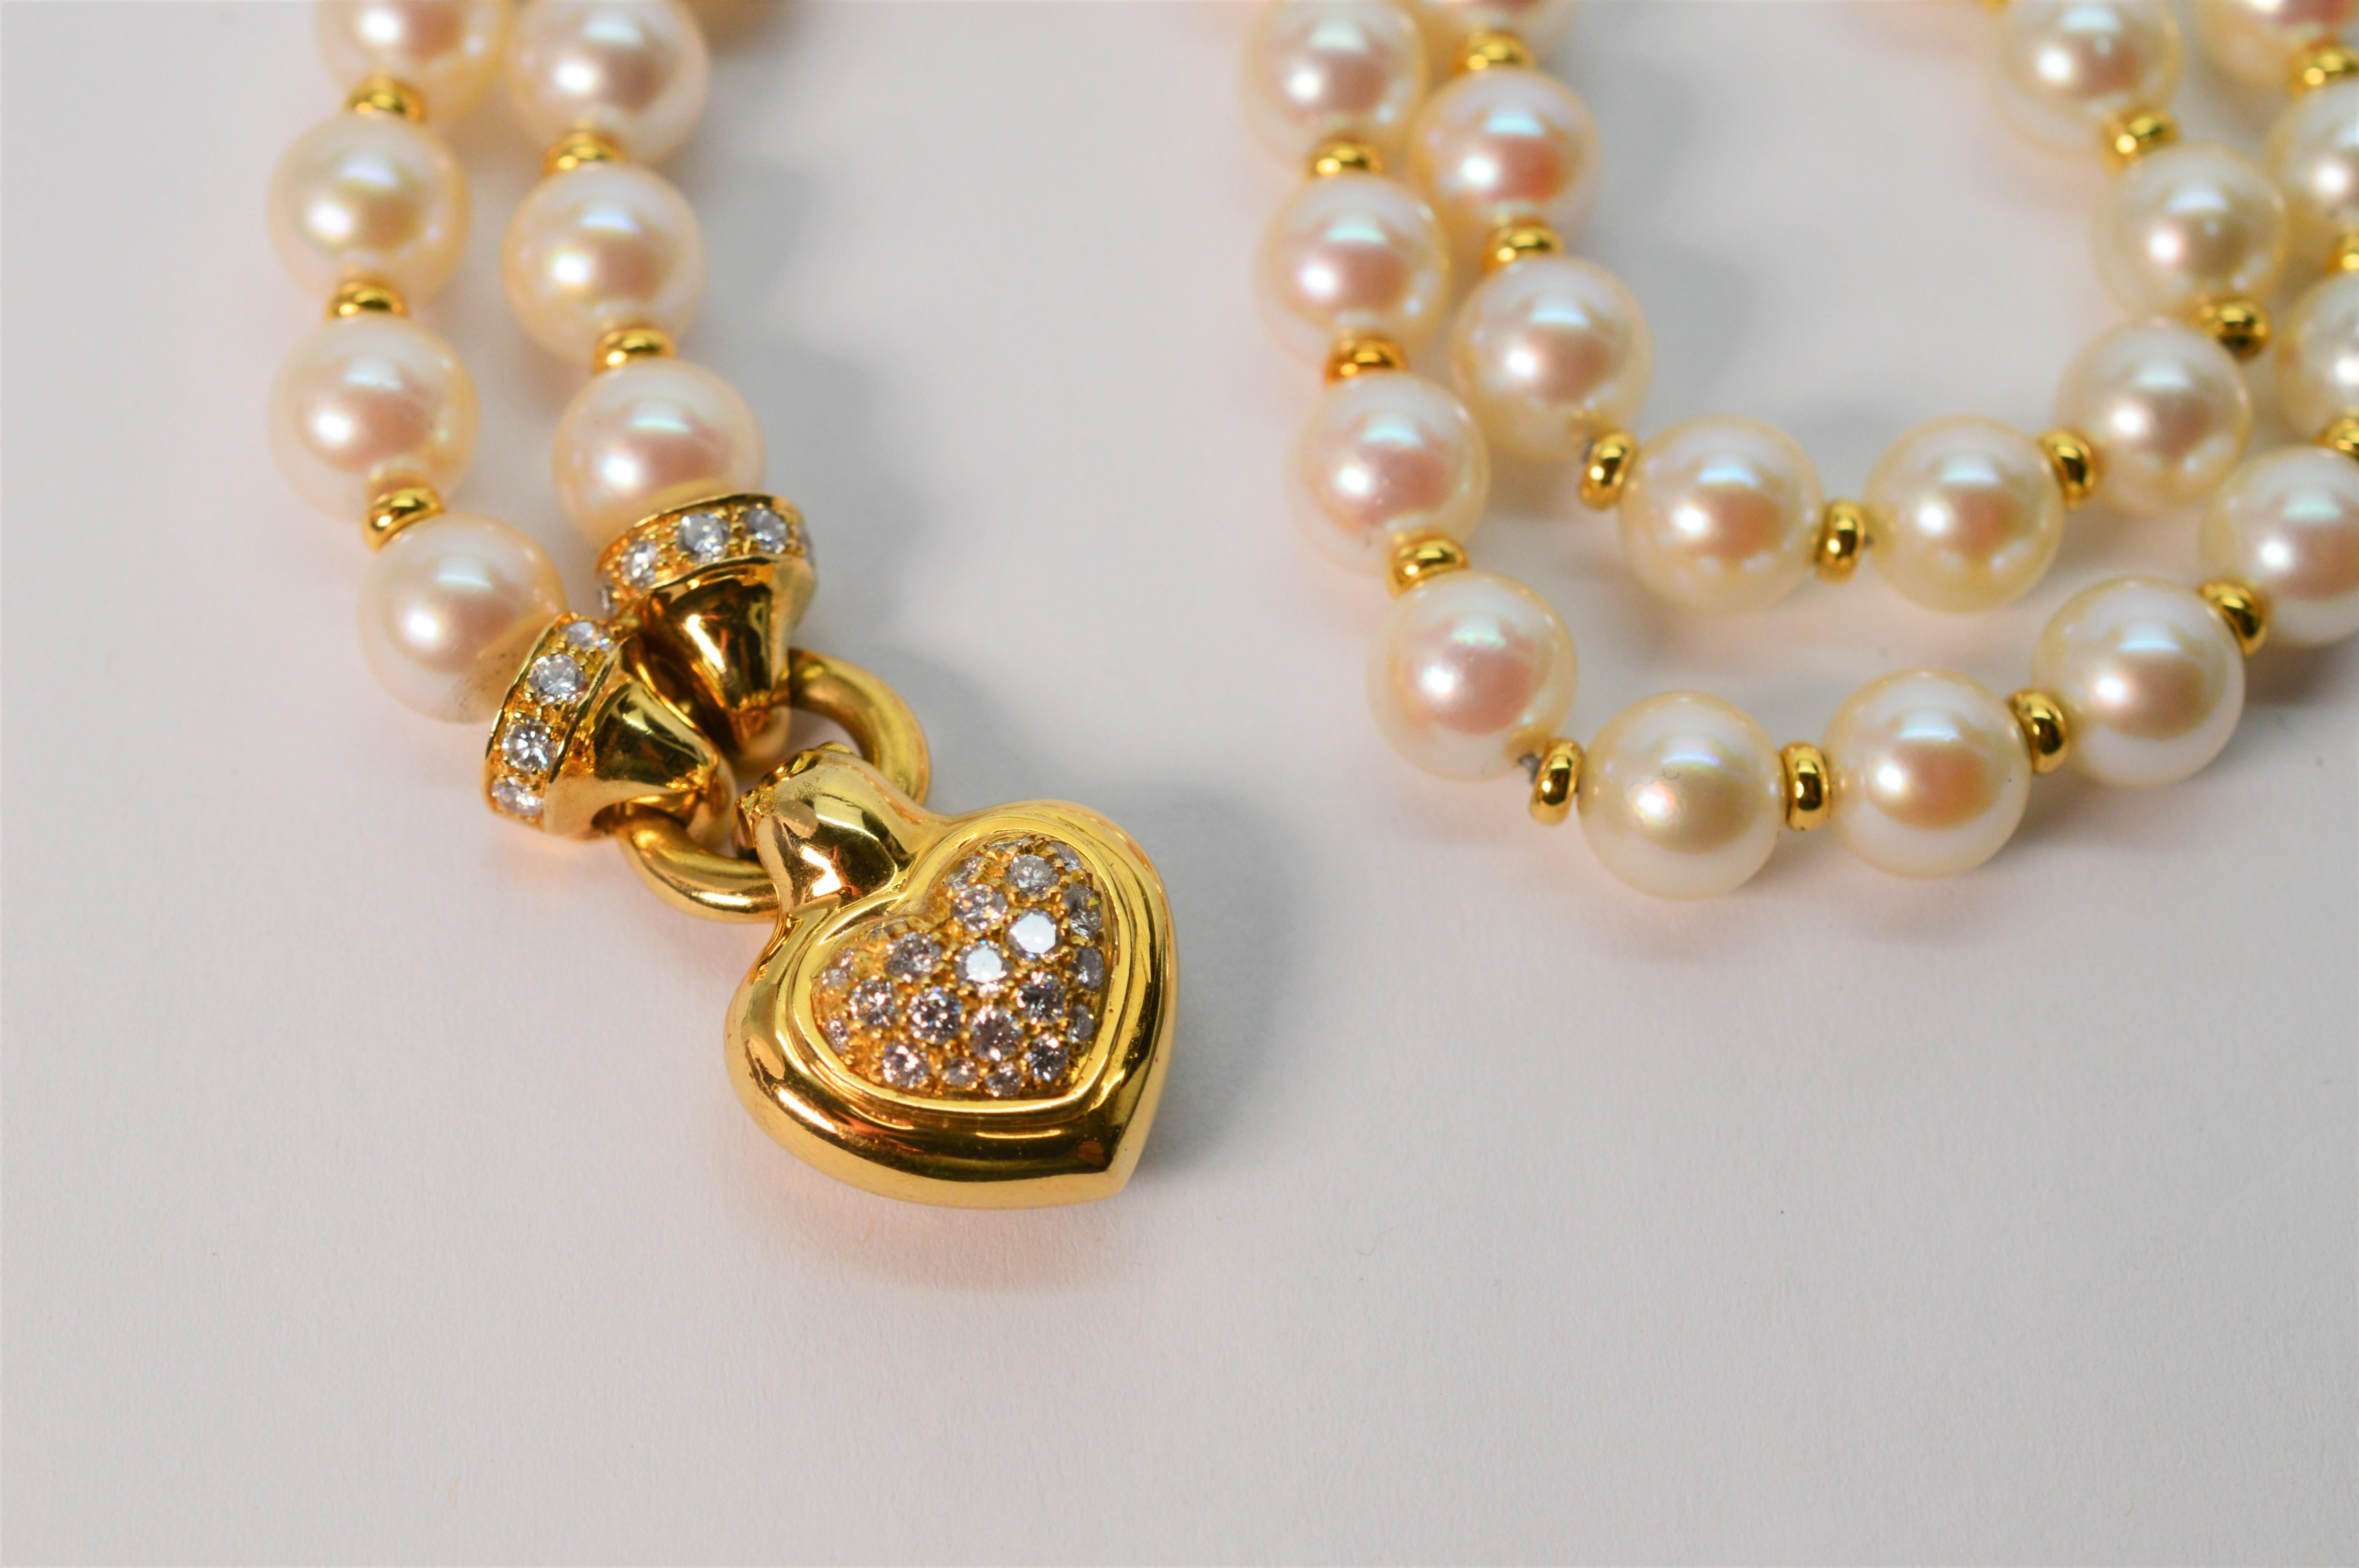 Diamond Heart 18K Yellow Gold Charm Pendant Pearl Necklace In Excellent Condition For Sale In Mount Kisco, NY